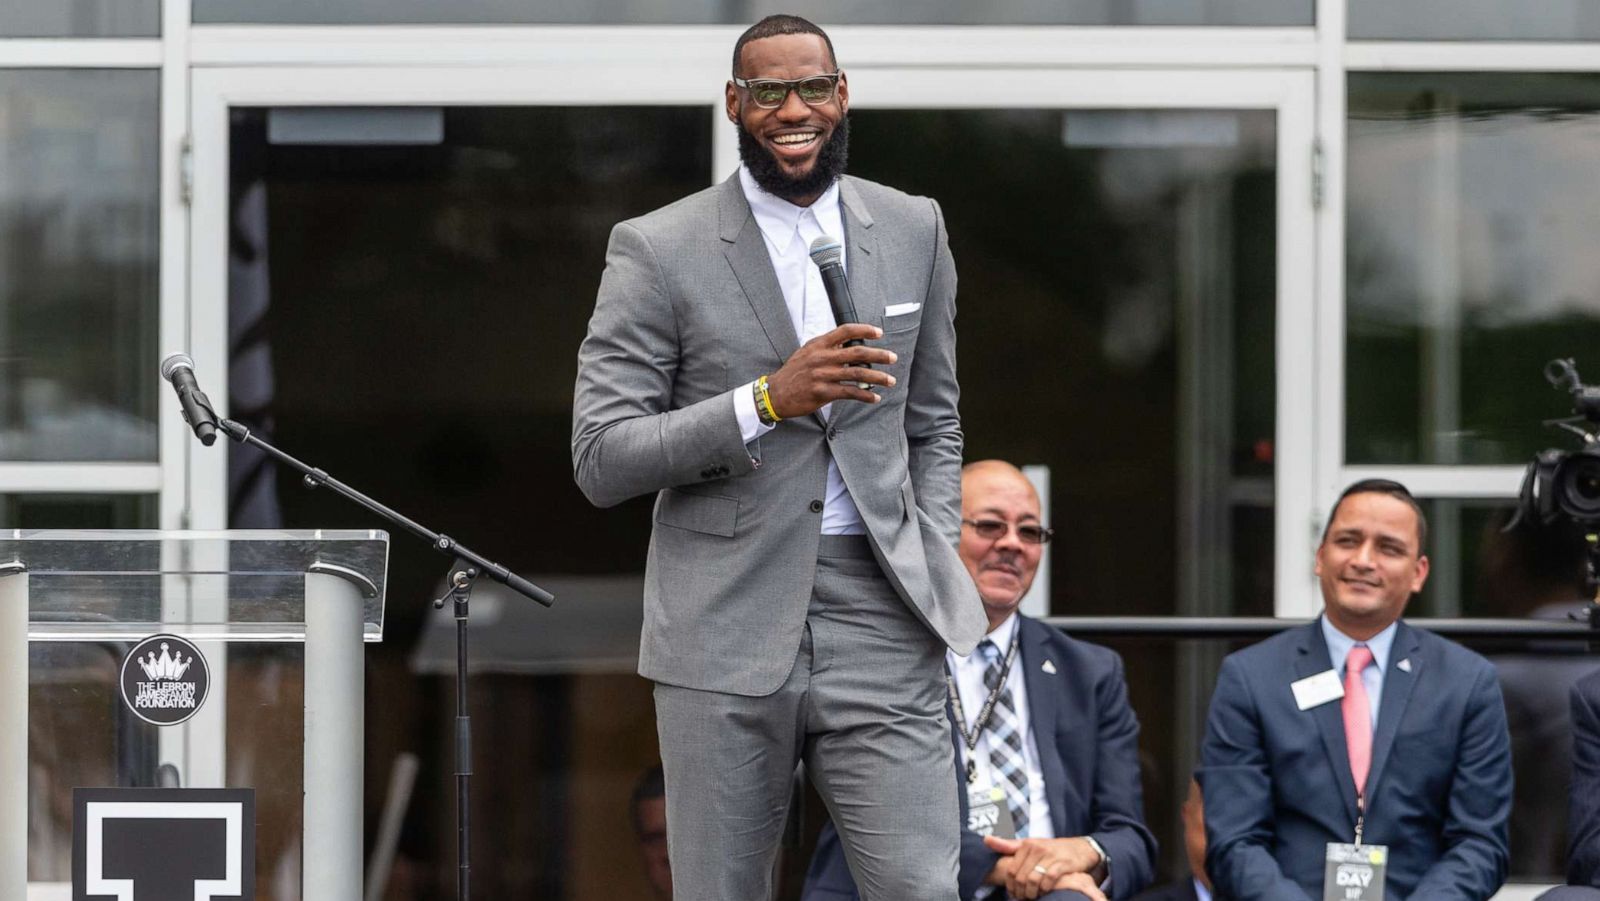 LeBron James' school to build transitional housing for students' families  in need - ABC News